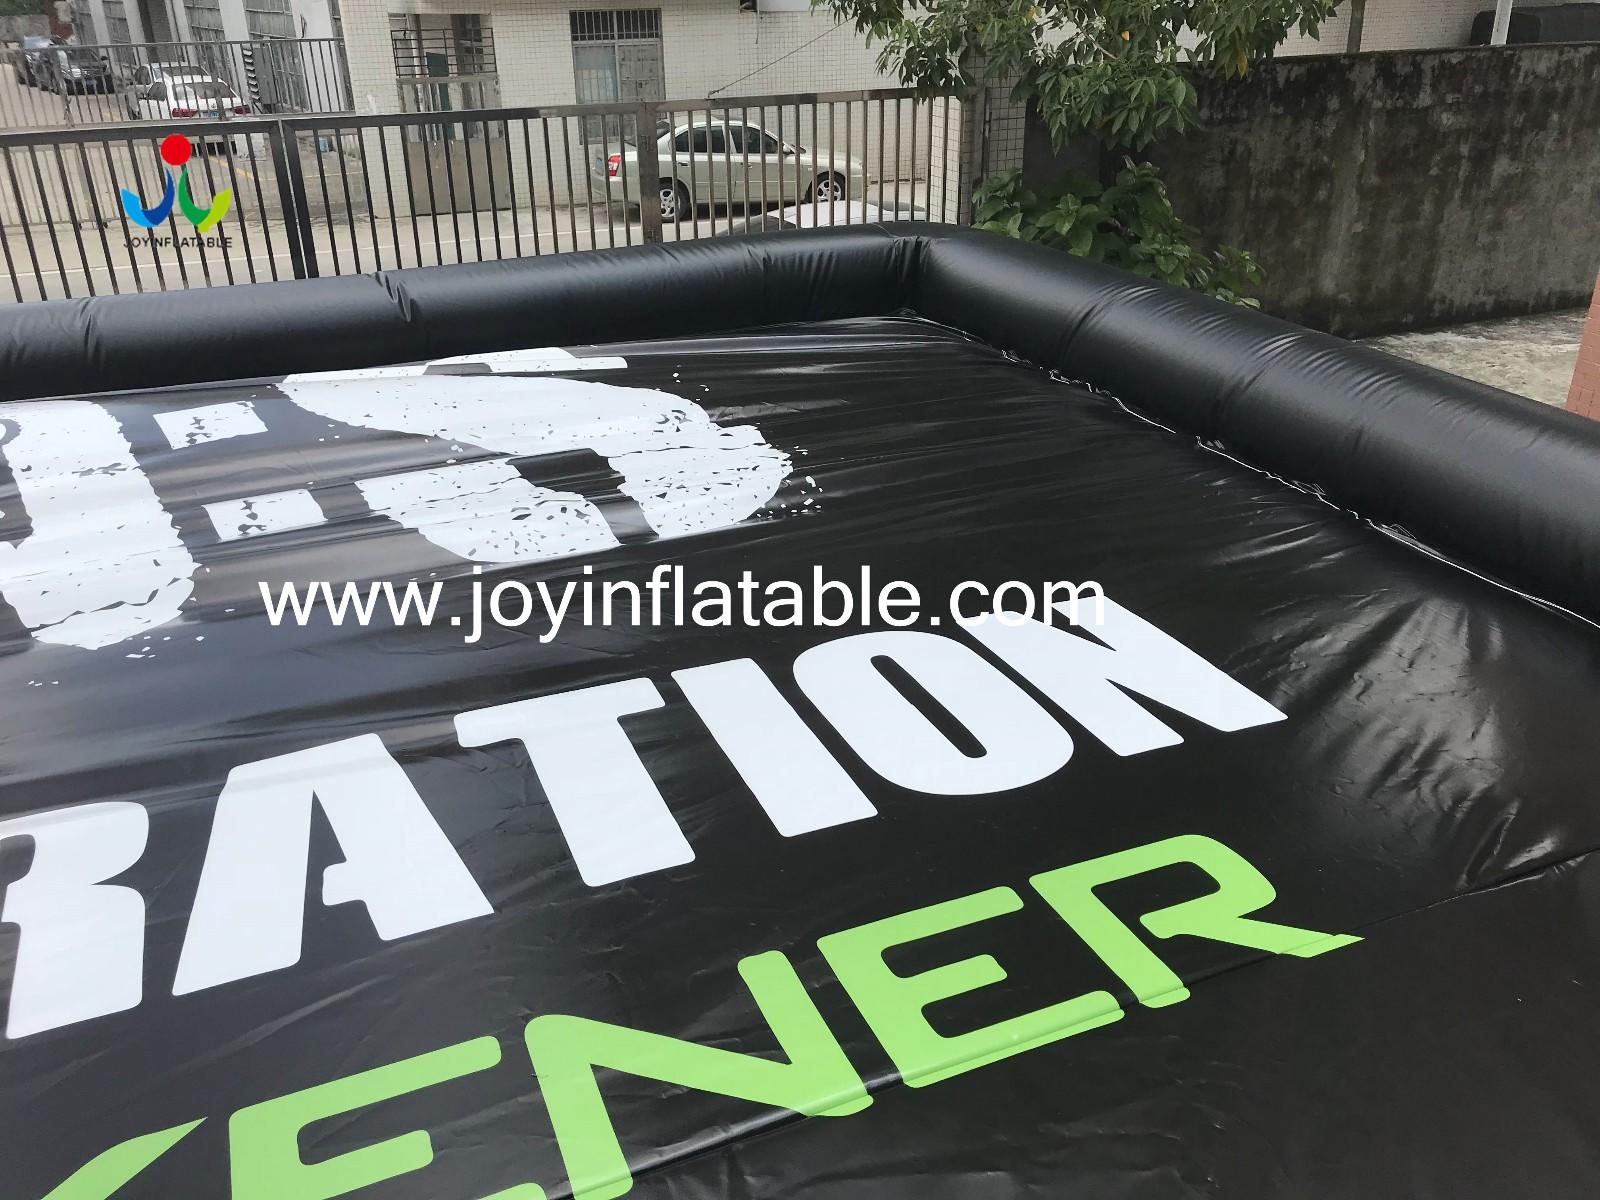 JOY inflatable fmx airbag for sale wholesale for outdoor